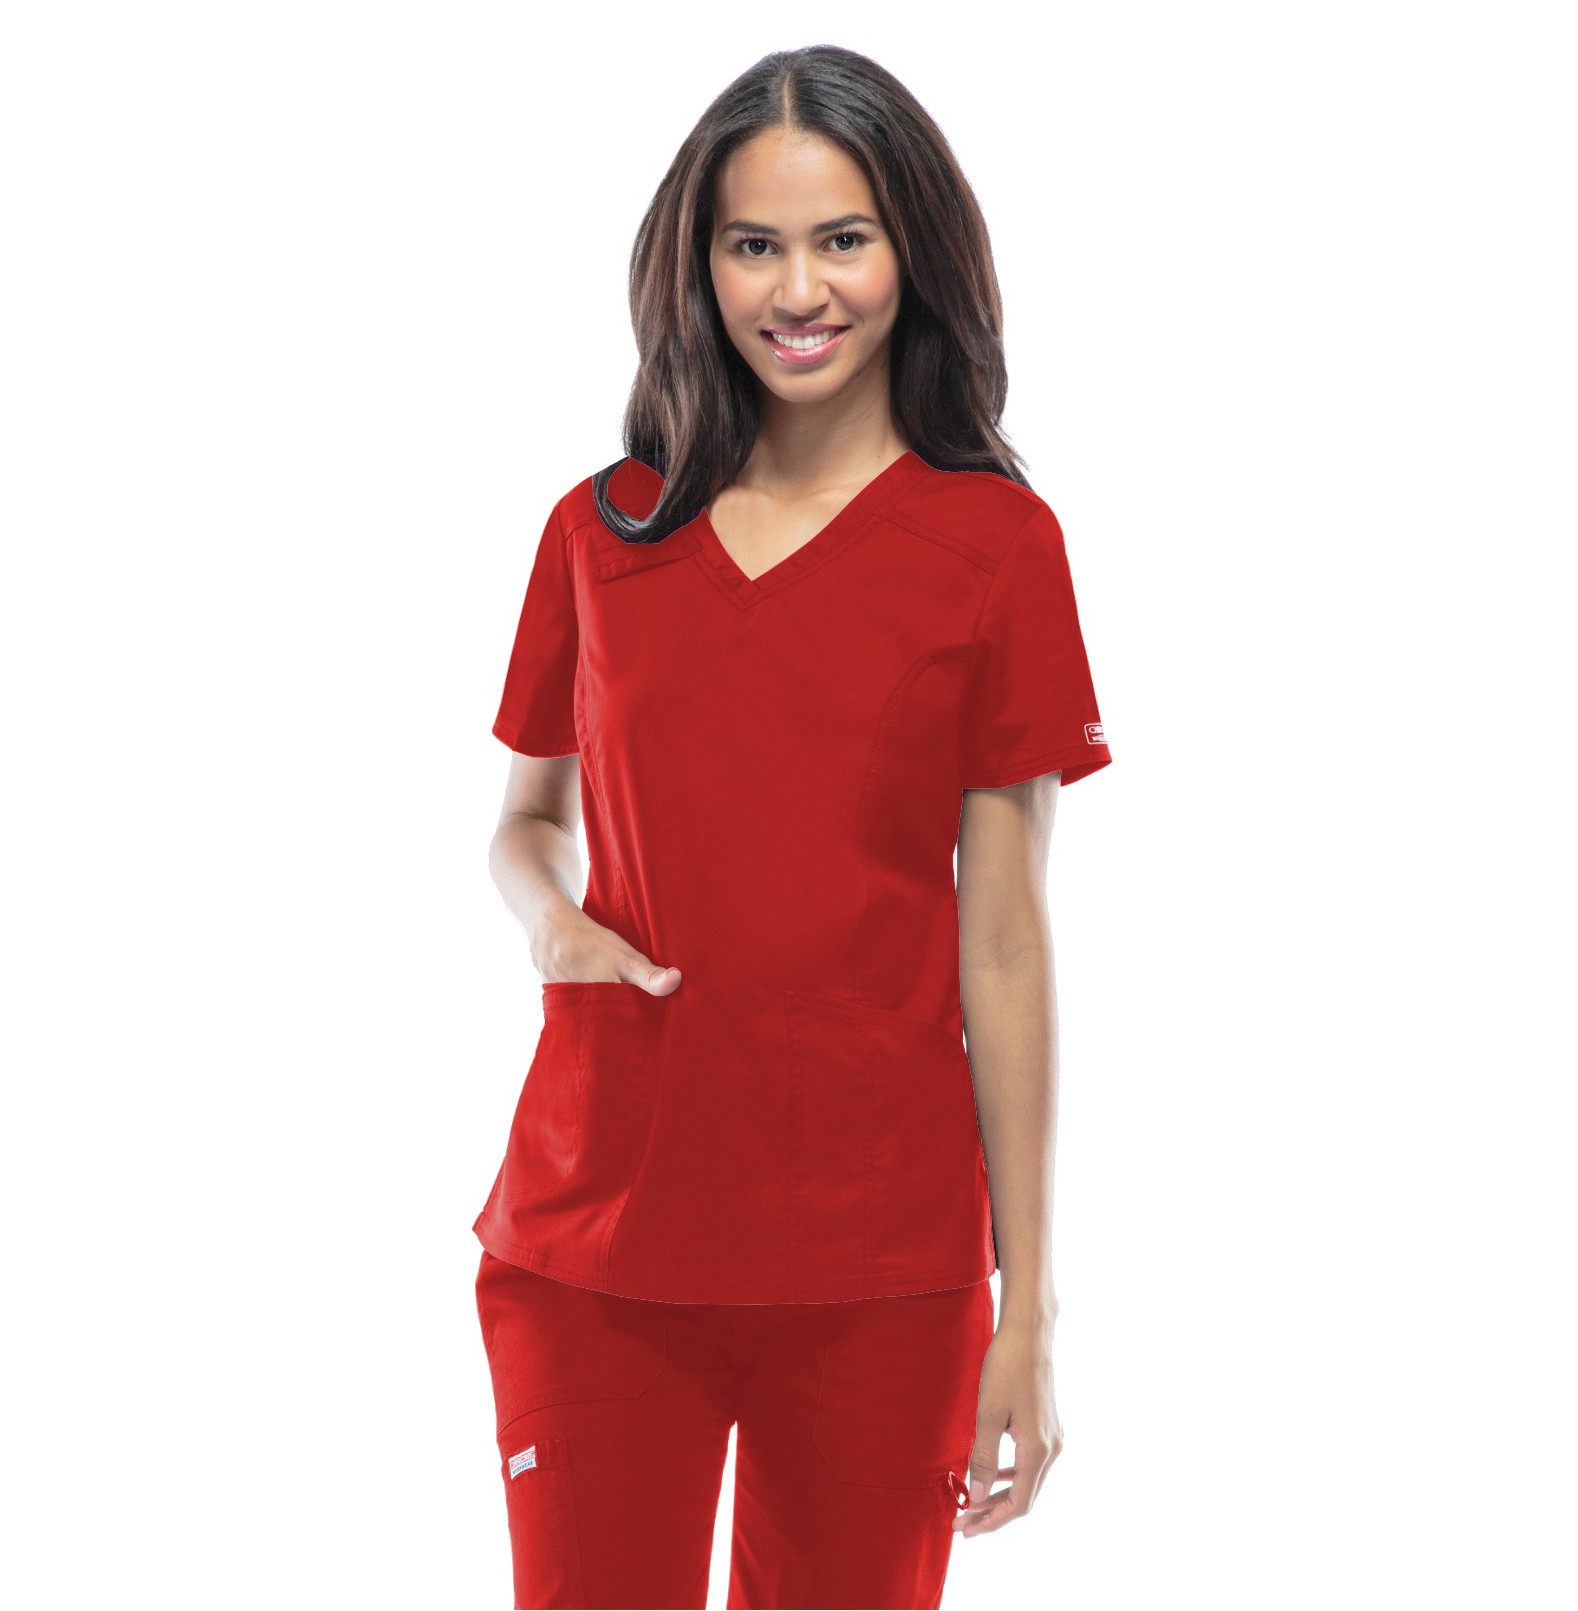 scrubs and speciality apparel as promotional products